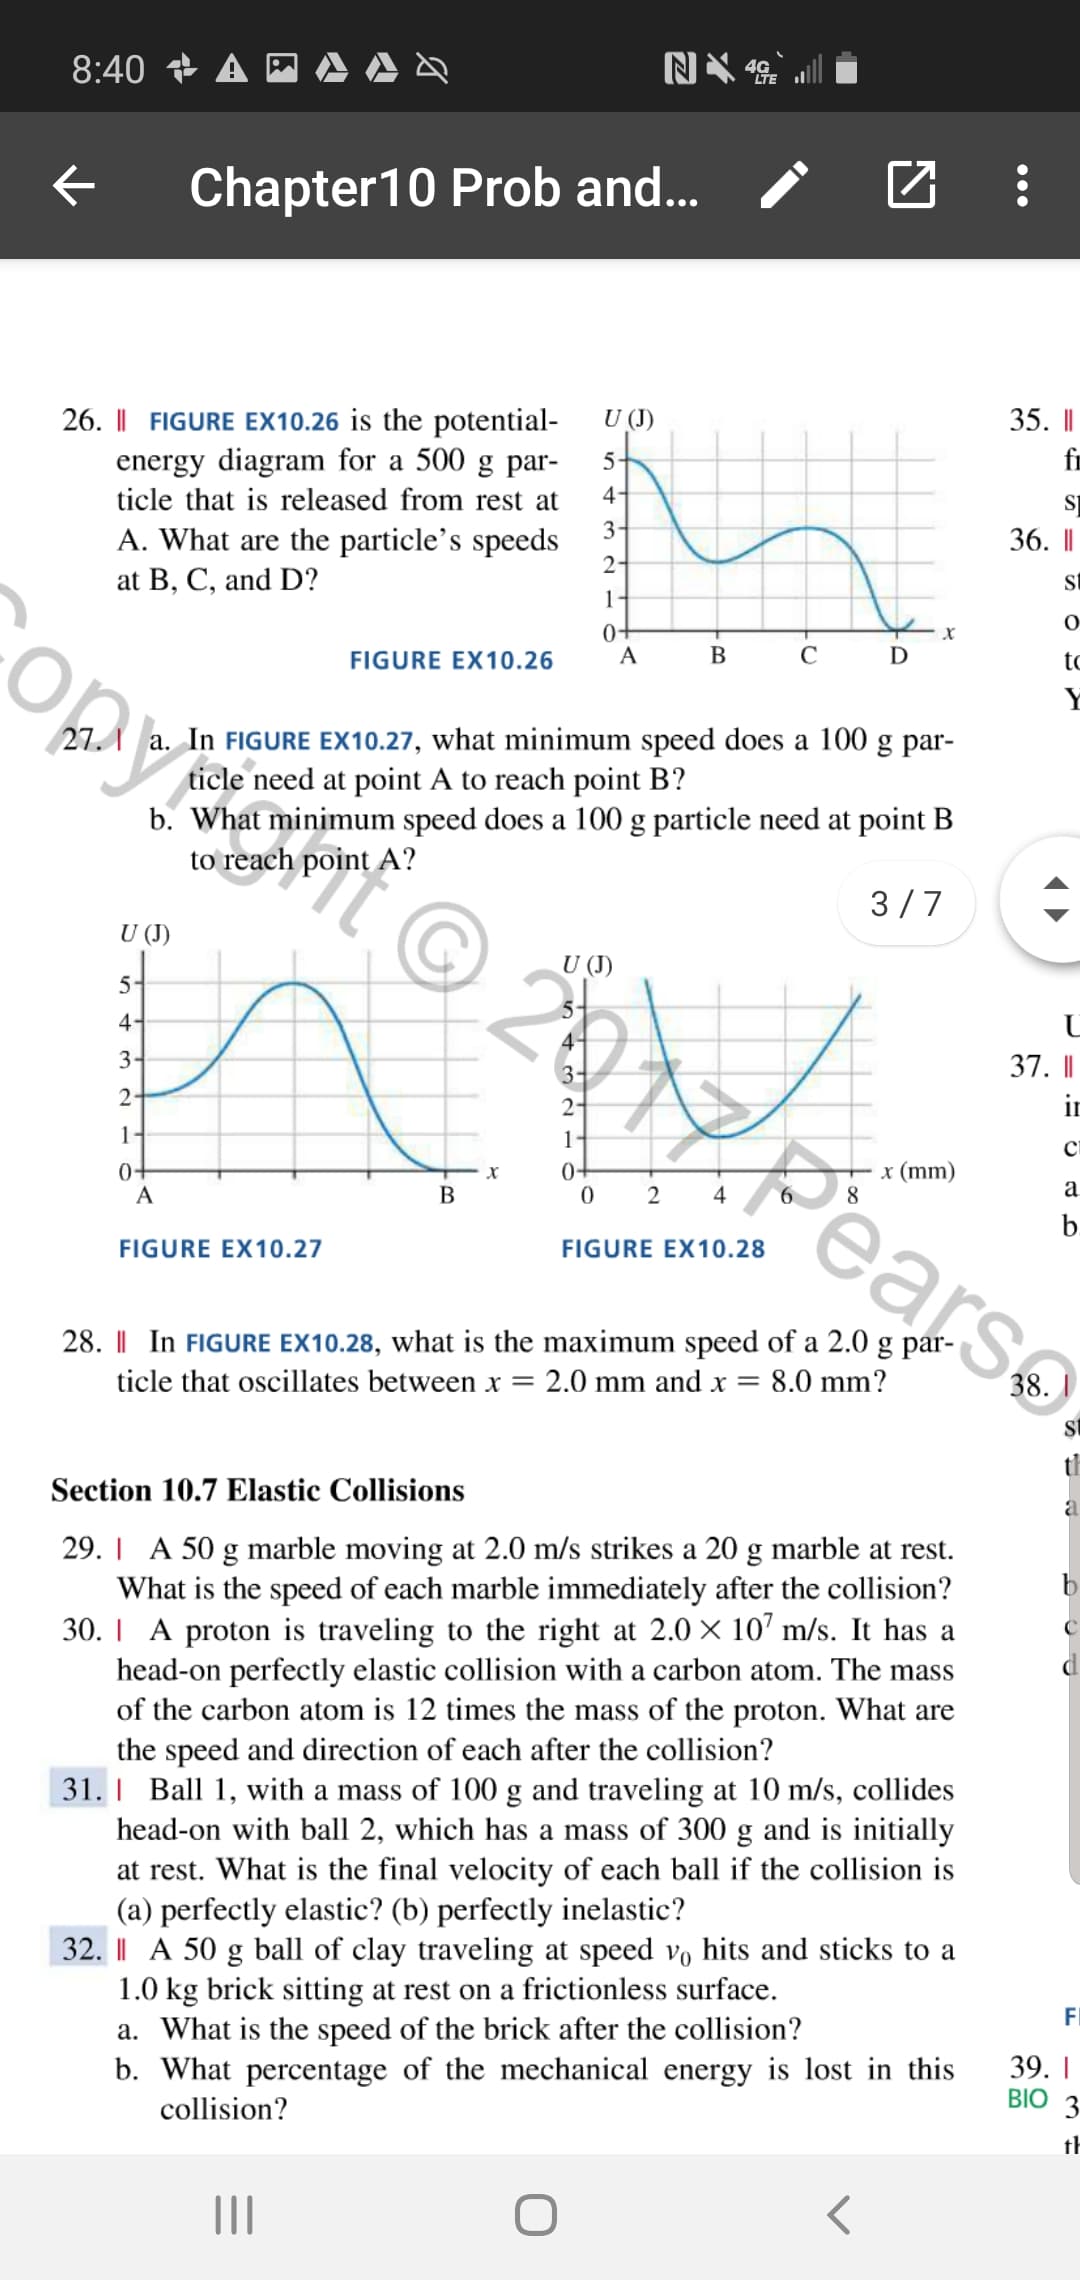 8:40 A
Chapter10 Prob and...
35. |
26. I FIGURE EX10.26 is the potential-
energy diagram for a 500 g par-
4-
U (J)
fr
5
ticle that is released from rest at
3
A. What are the particle's speeds
2-
36. |
at B, C, and D?
1-
0+
х
В
С
FIGURE EX10.26
tc
27.
a. In FIGURE EX10.27, what minimum speed does a 100 g par-
ticle need at point A to reach point B?
b. What minimum speed does a 100 g particle need at point B
to reach point A?
3 7
U (J)
U (J)
5
4
3
37. I
3-
2-
2
1-
1
с
Pears
04
0 2
х (mm)
04
х
а
В
4
b.
FIGURE EX10.27
FIGURE EX10.28
28. I In FIGURE EX10.28, what is the maximum speed of a 2.0 g par-
ticle that oscillates between x
2.0 mm and x =
8.0 mm?
38.
th
Section 10.7 Elastic Collisions
a
29. A 50 g marble moving at 2.0 m/s strikes a 20 g marble at rest
What is the speed of each marble immediately after the collision?
30. A proton is traveling to the right at 2.0 X 10 m/s. It has a
head-on perfectly elastic collision with a carbon atom. The mass
of the carbon atom is 12 times the mass of the proton. What are
the speed and direction of each after the collision?
31. I Ball 1, with a mass of 100 g and traveling at 10 m/s, collides
head-on with ball 2, which has a mass of 300 g and is initially
at rest. What is the final velocity of each ball if the collision is
(a) perfectly elastic? (b) perfectly inelastic?
32. I A 50 g ball of clay traveling at speed vo hits and sticks to a
1.0 kg brick sitting at rest on a frictionless surface
a. What is the speed of the brick after the collision?
b. What percentage of the mechanical energy is lost in this
b
FI
39.I
BIO
3
collision?
th
